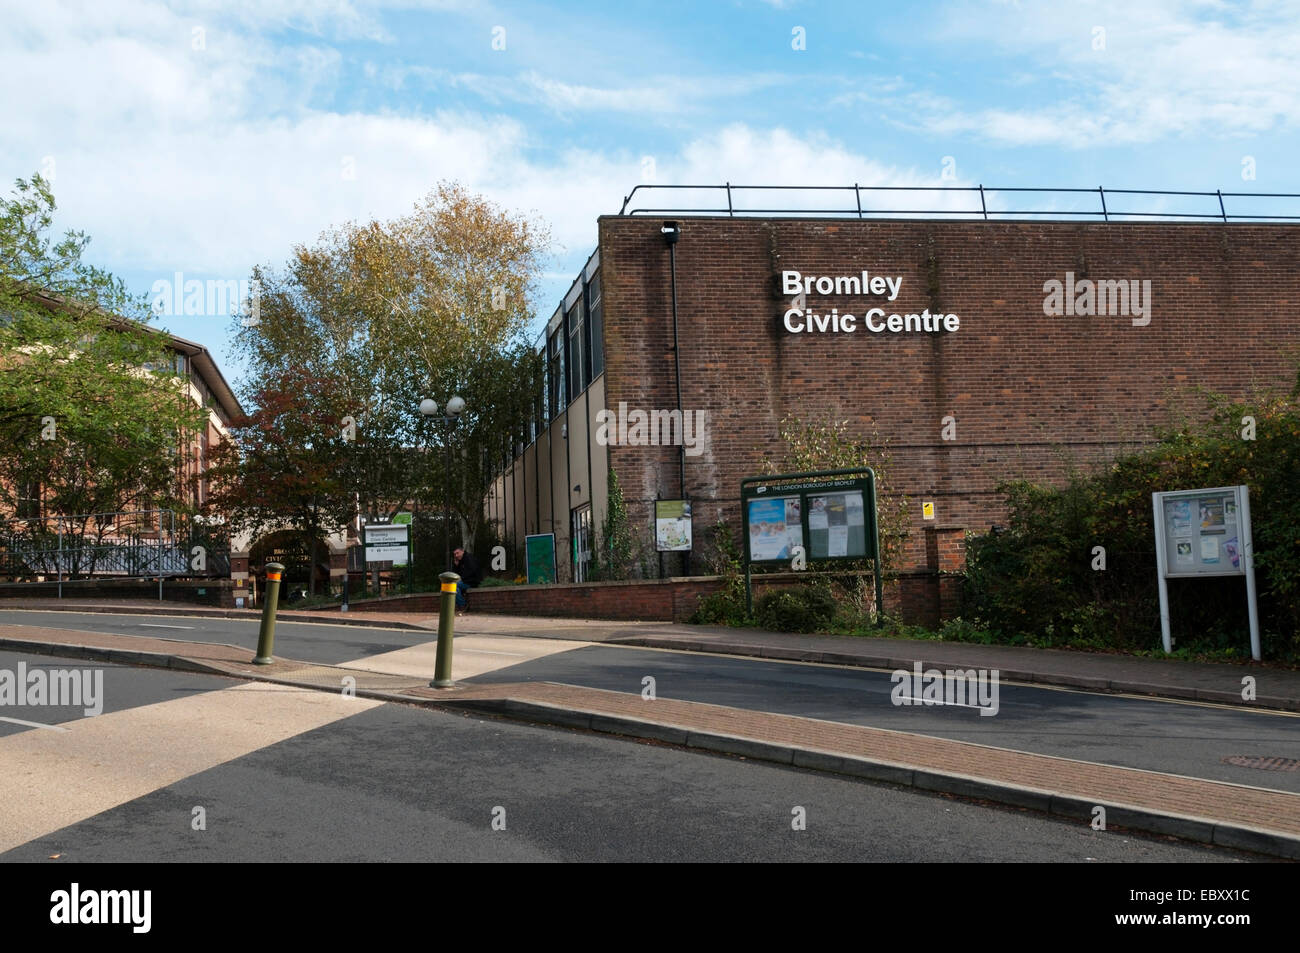 Bromley Civic Centre in South London. Stock Photo